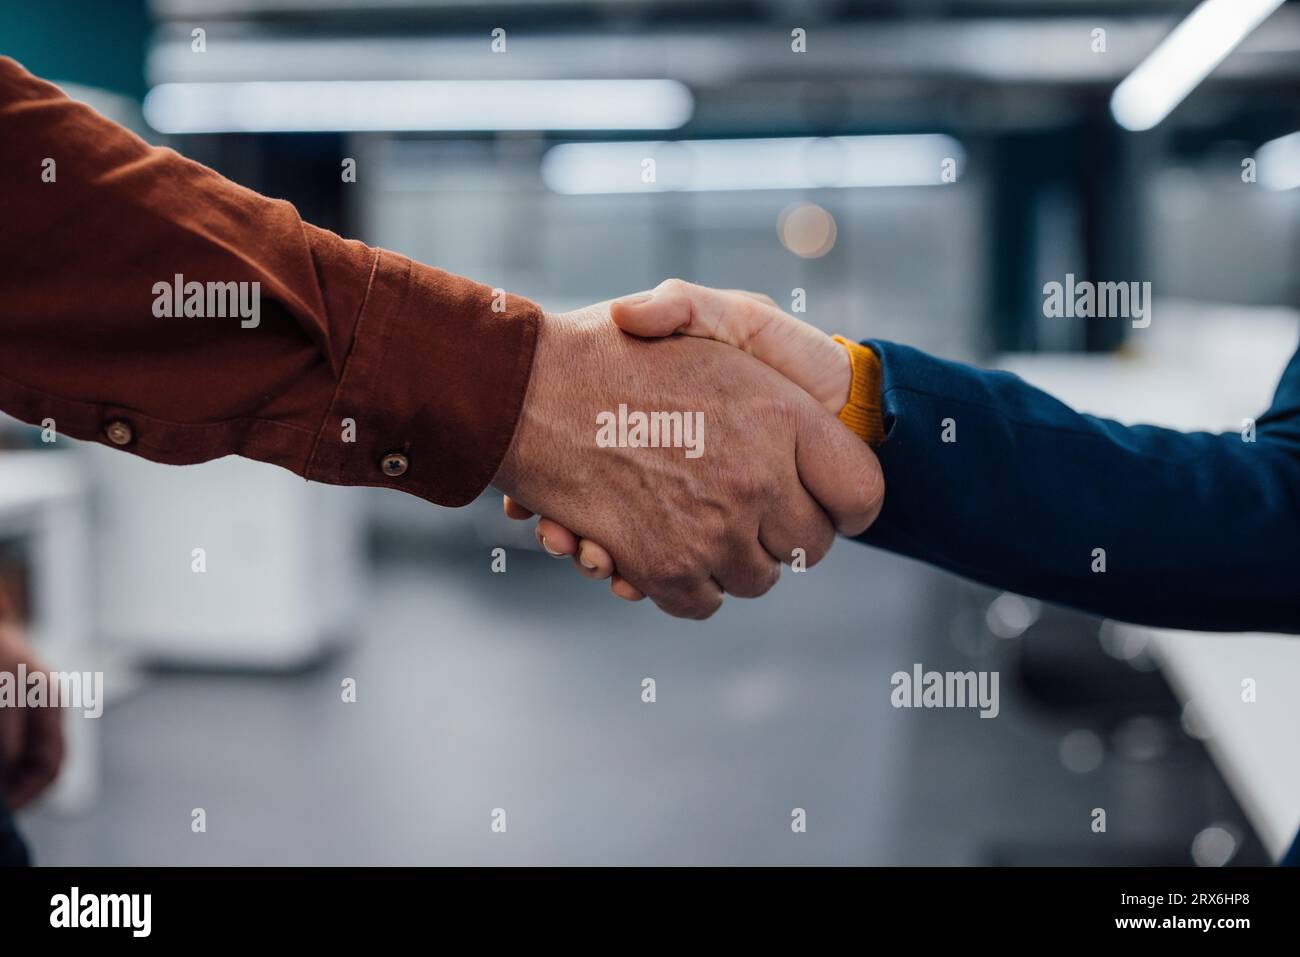 Hands of business colleagues shaking hands at work place Stock Photo